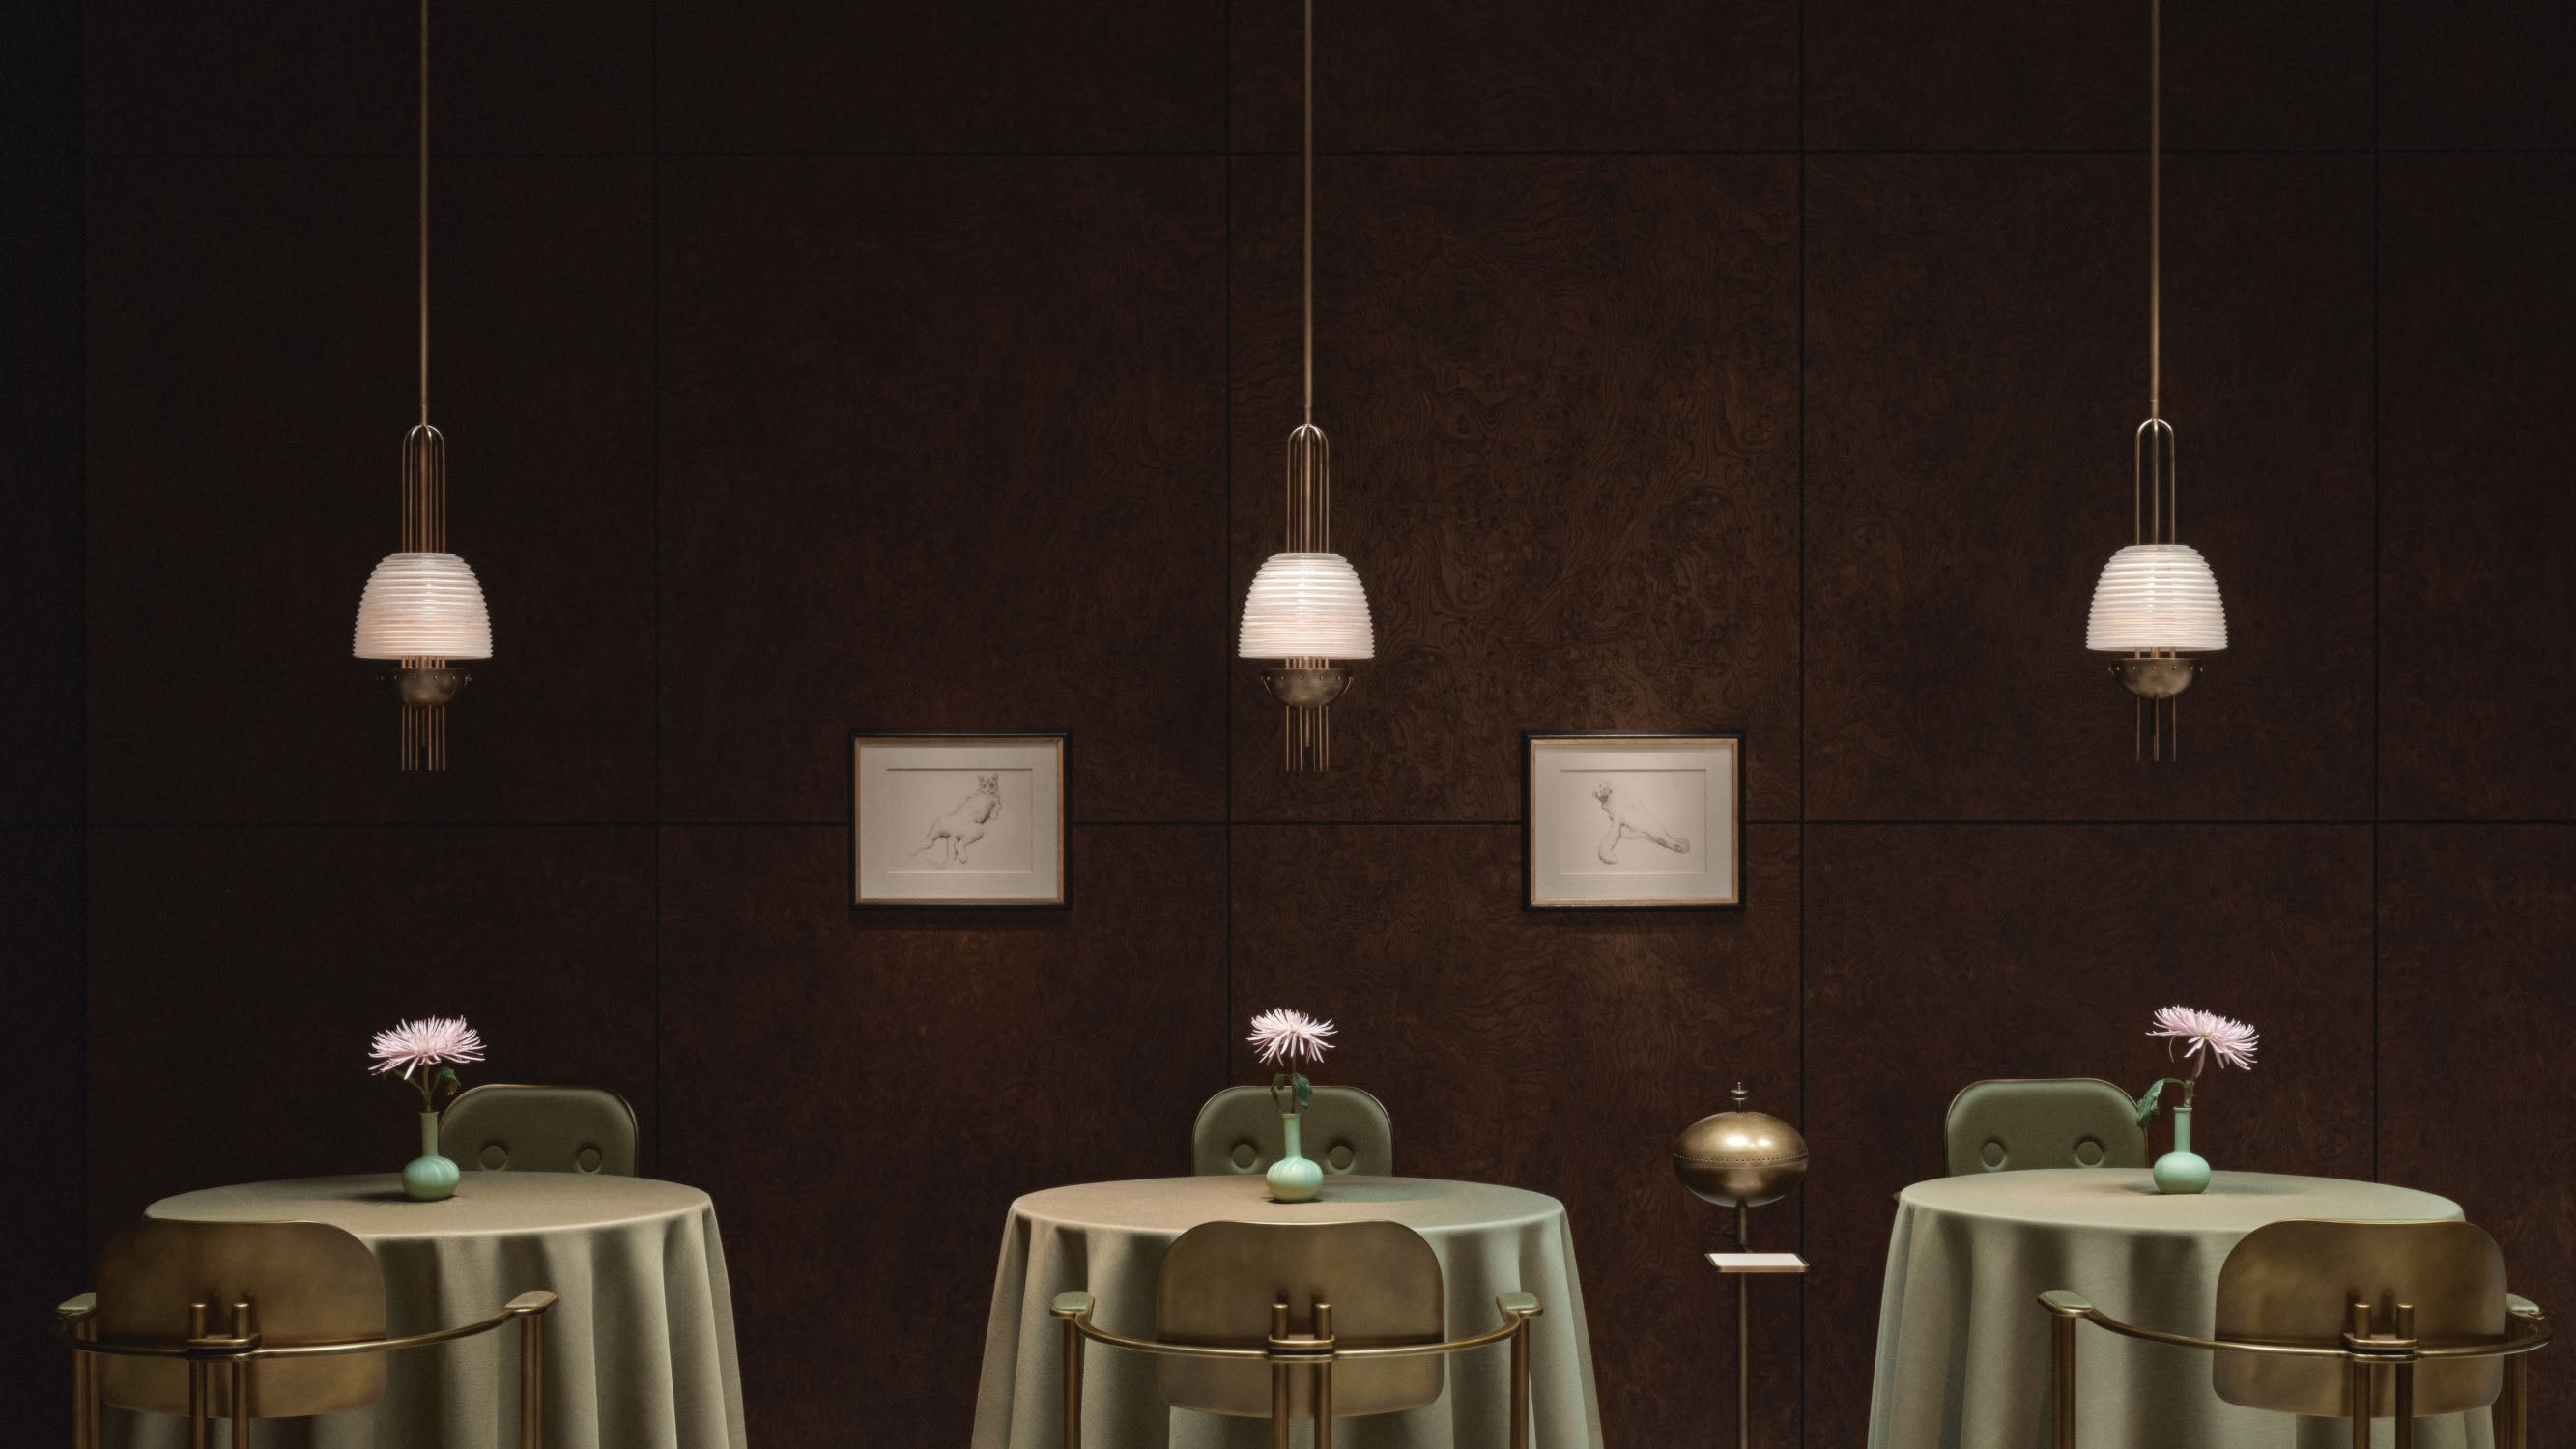 EPISODE armchairs set at three circular dining tables with SIGNAL : X ceiling pendants hanging overhead. 